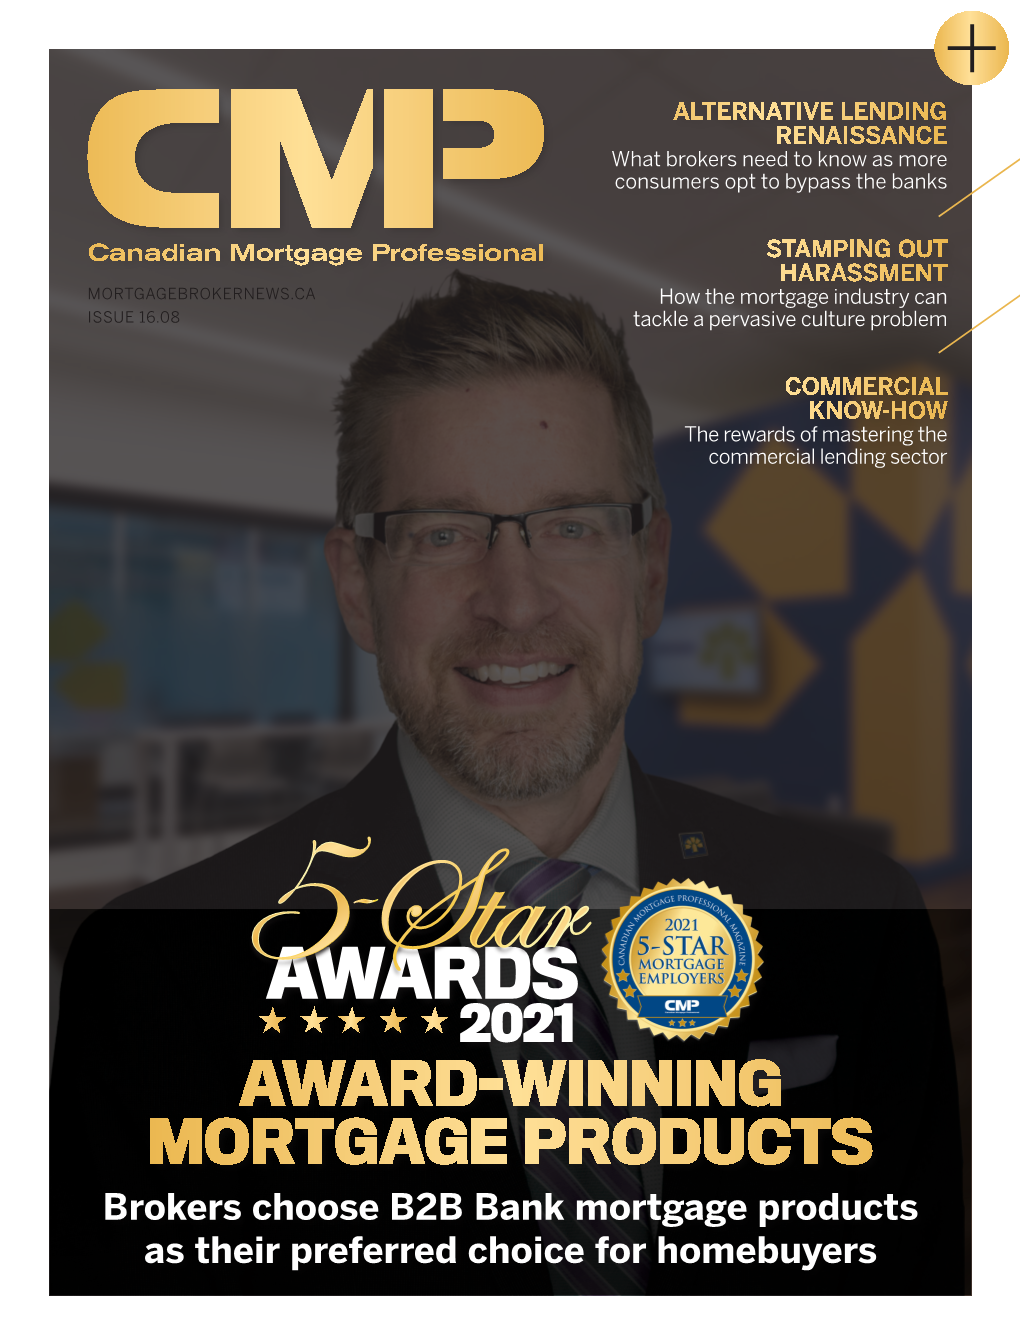 AWARD-WINNING MORTGAGE PRODUCTS Brokers Choose B2B Bank Mortgage Products As Their Preferred Choice for Homebuyers SPECIAL REPORT